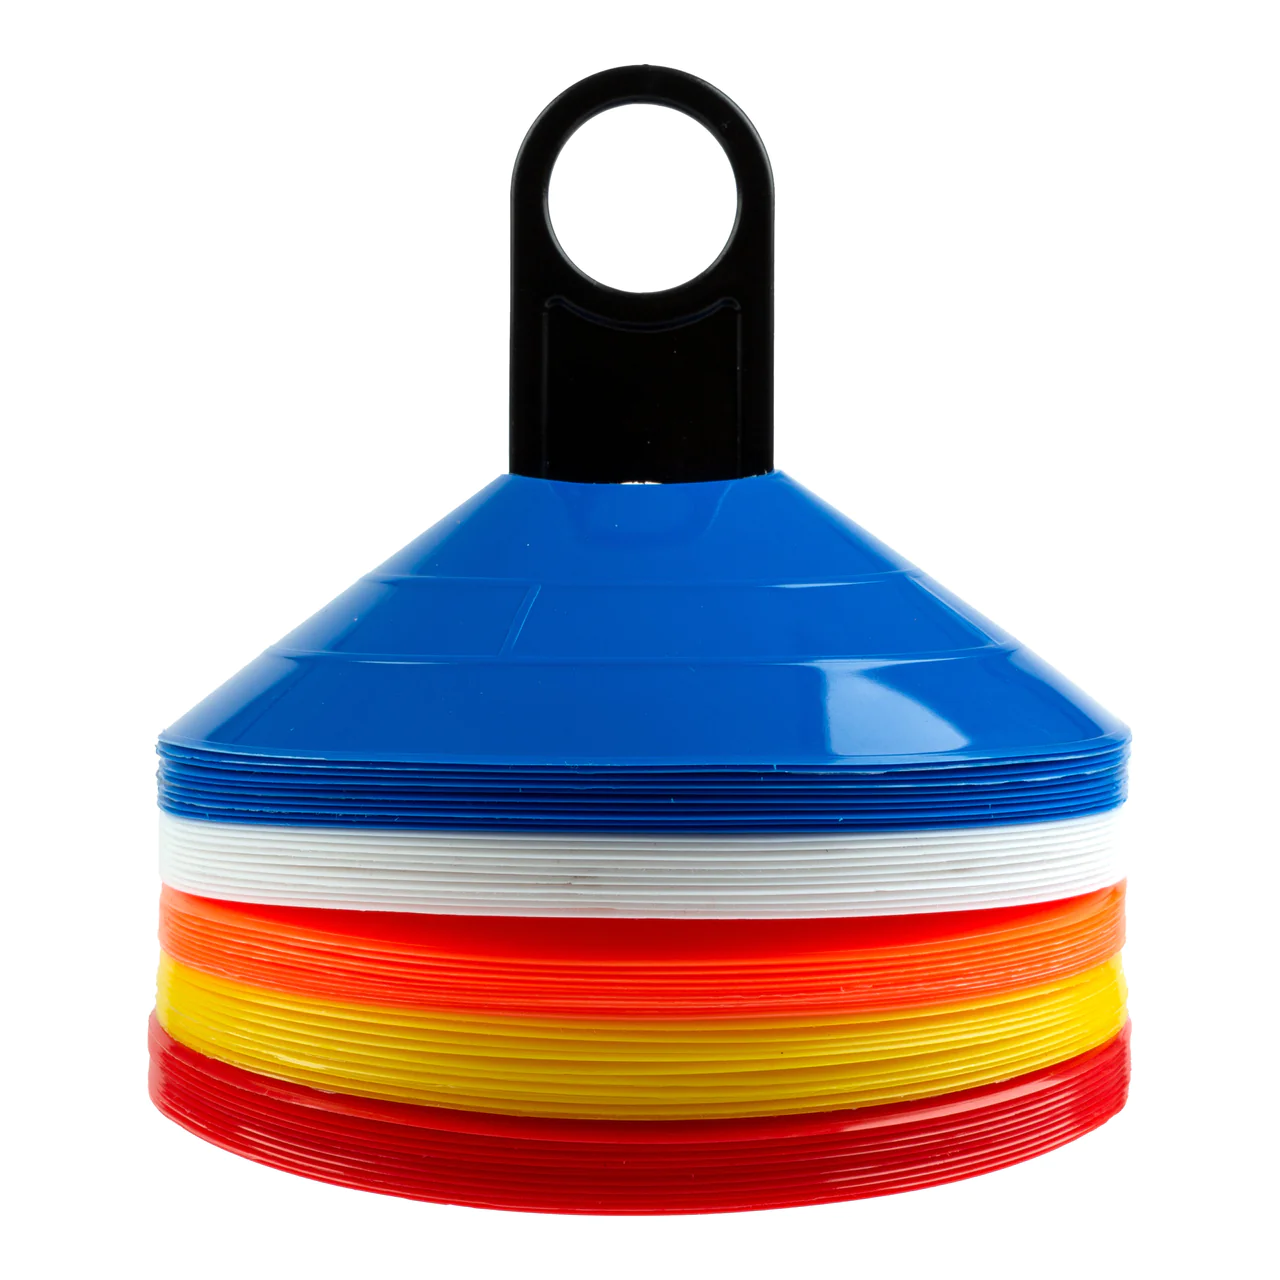 Marker Cone For Sports Training - 41FWG229